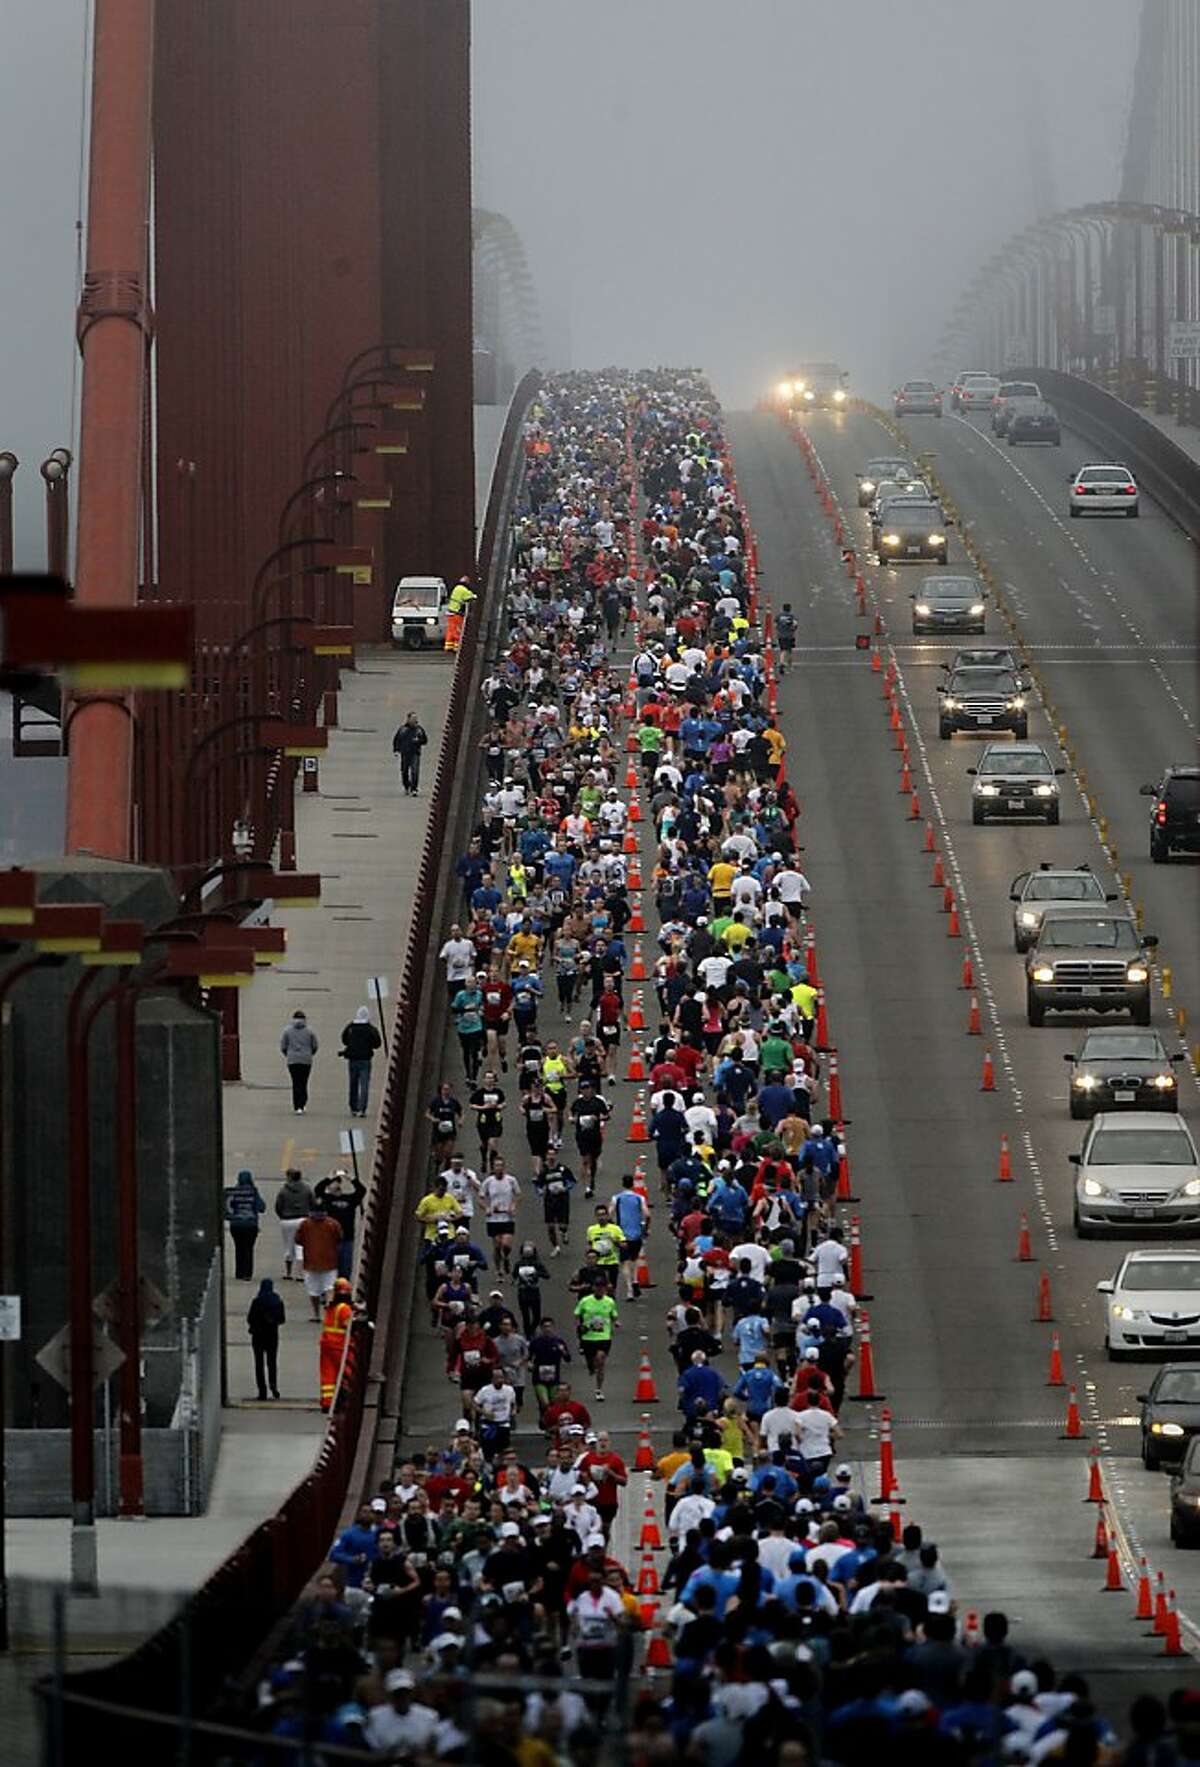 The Golden Gate Bridge was mostly in fog when the runners crossed. The annual San Francisco Marathon starts and ends on the Embarcadero. Marathon runners also ran across a foggy Golden Gate Bridge Sunday July 29, 2012.